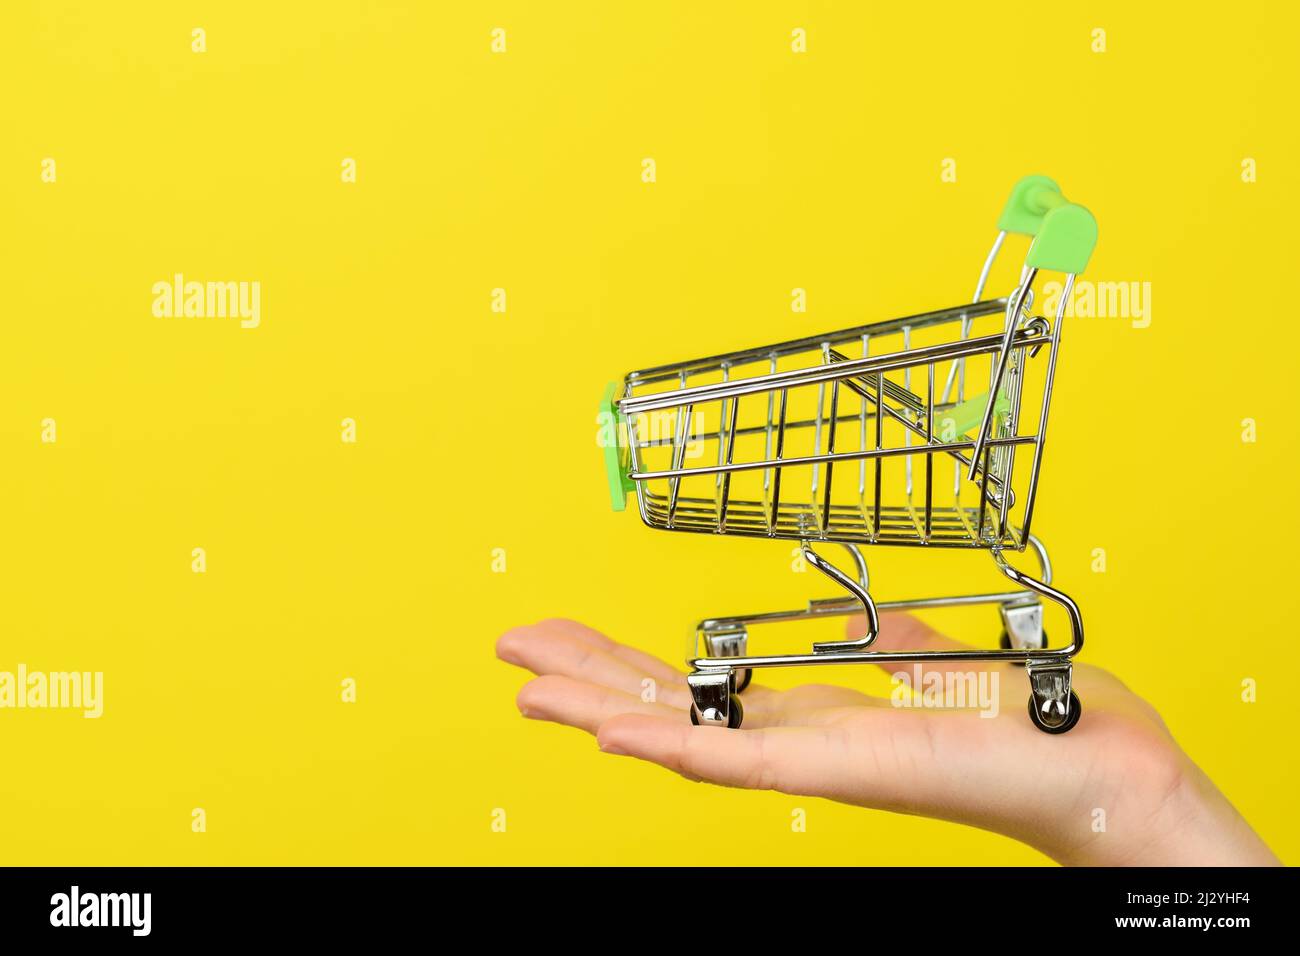 Empty shopping cart on female hand. Shopping theme. Small Trolley isolated on a bright yellow background. Consumer concept, Copy space. Stock Photo